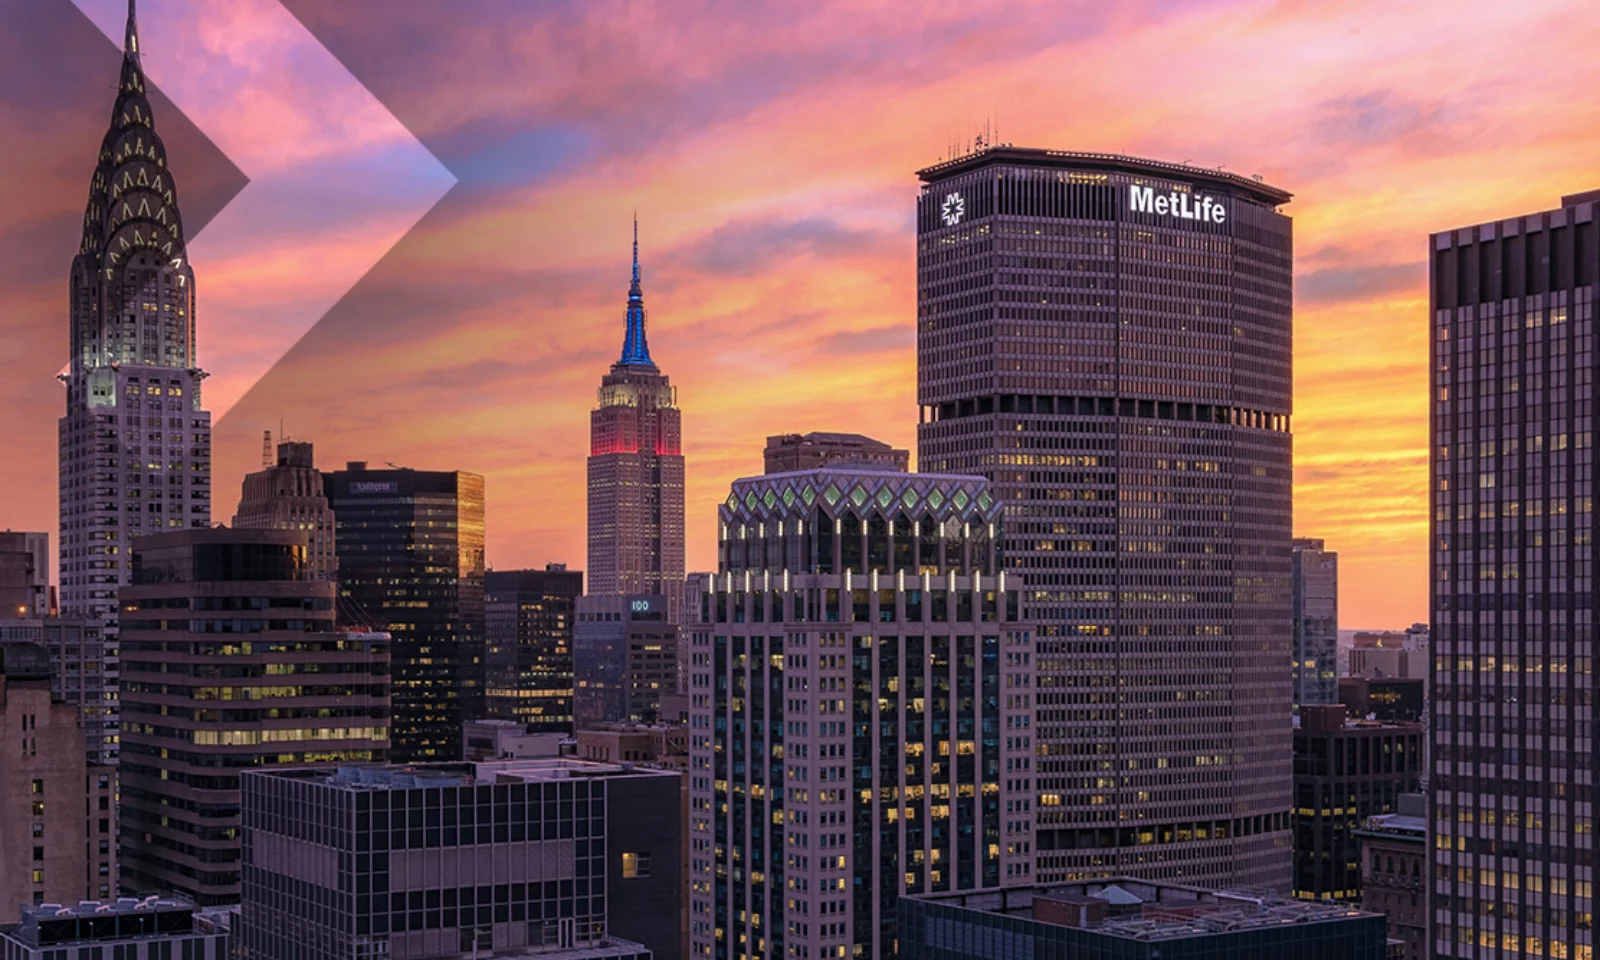 Stunning New York City skyline at sunset, showcasing iconic architecture like the Chrysler Building and MetLife Building against a colorful sky. Ideal representation of urban innovation and architectural beauty.